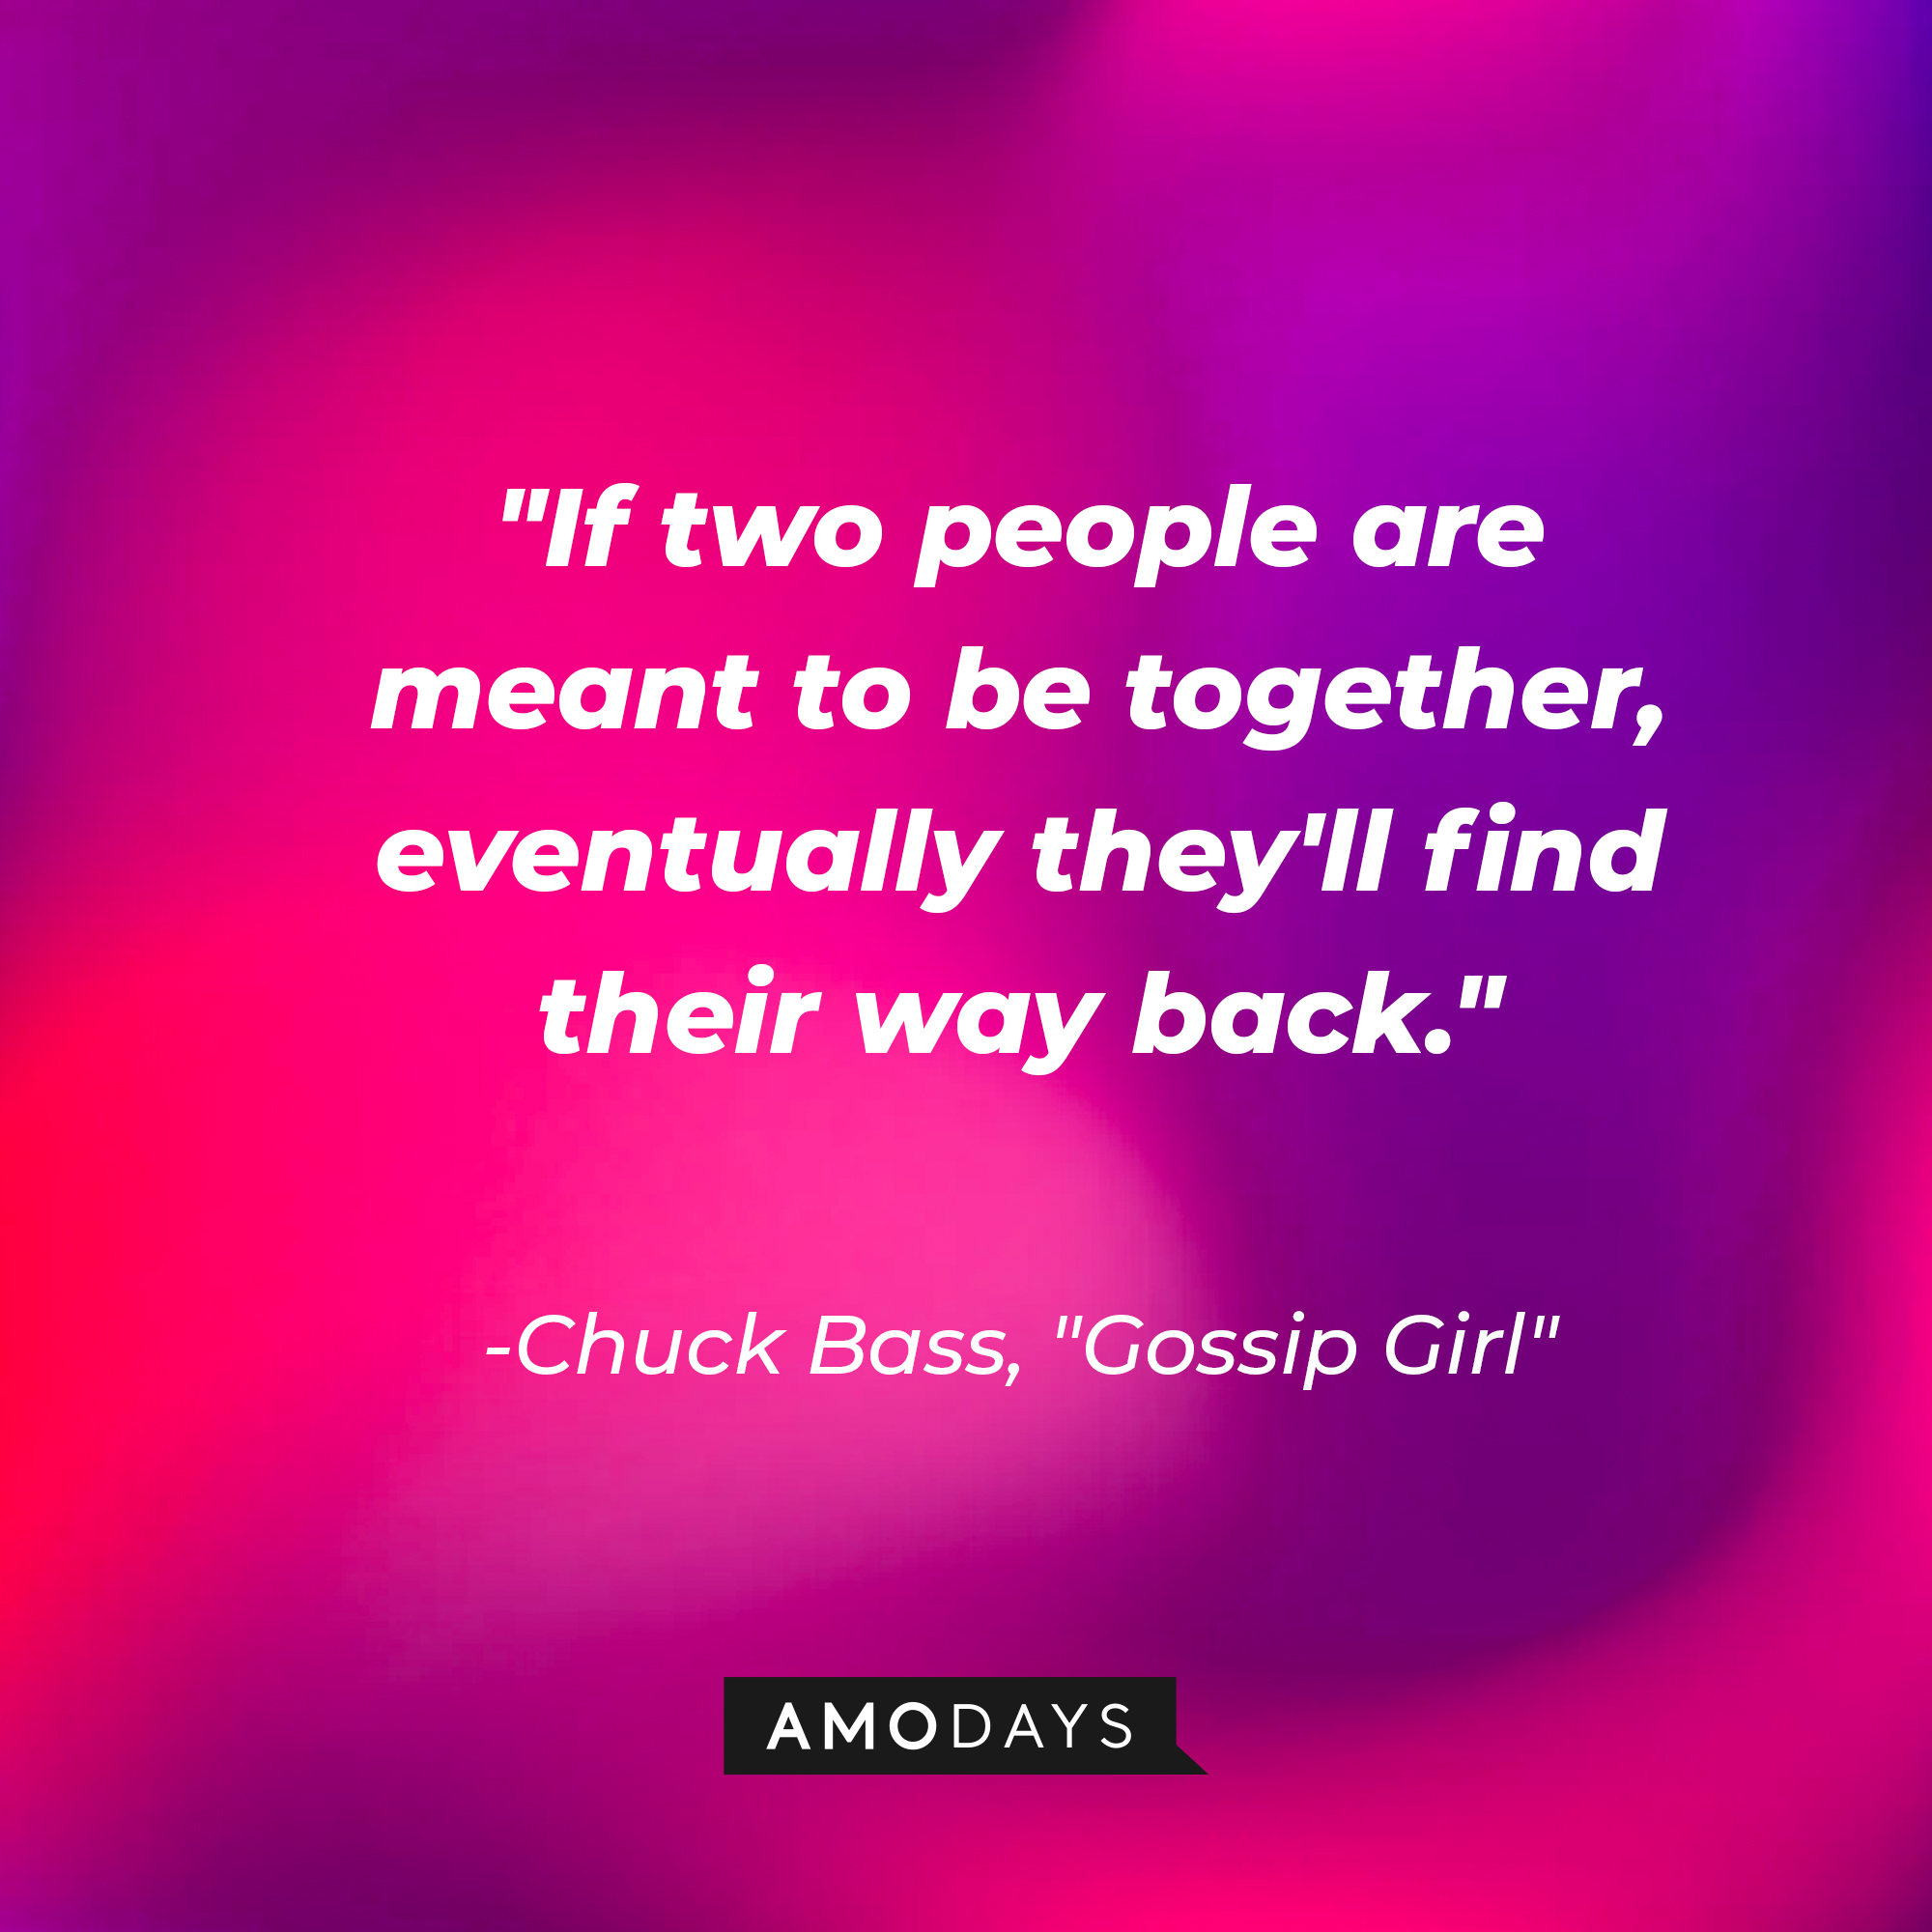 Chuck Bass' quote: "If two people are meant to be together, eventually they'll find their way back." | Source: AmoDays